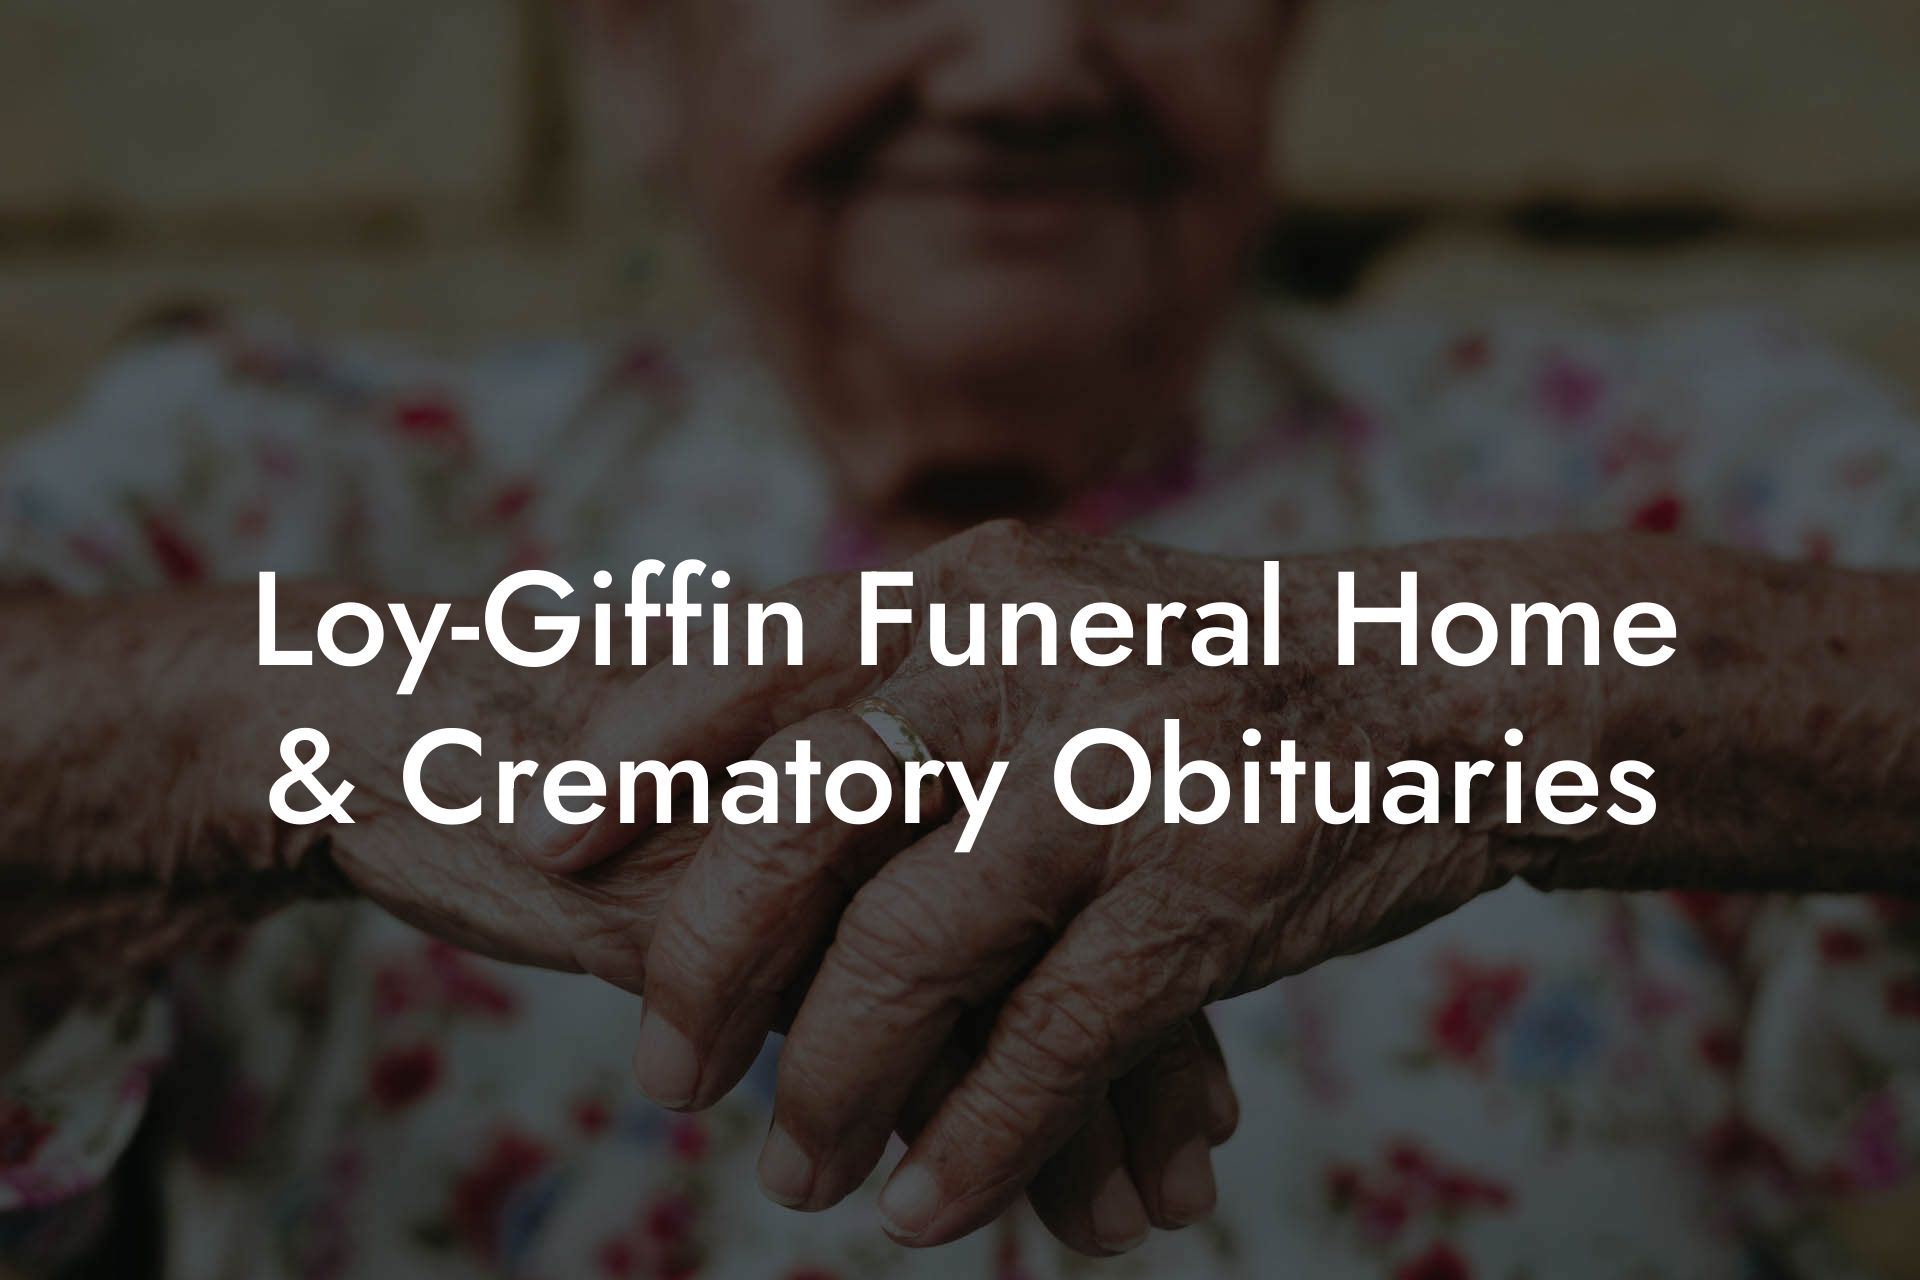 Loy-Giffin Funeral Home & Crematory Obituaries